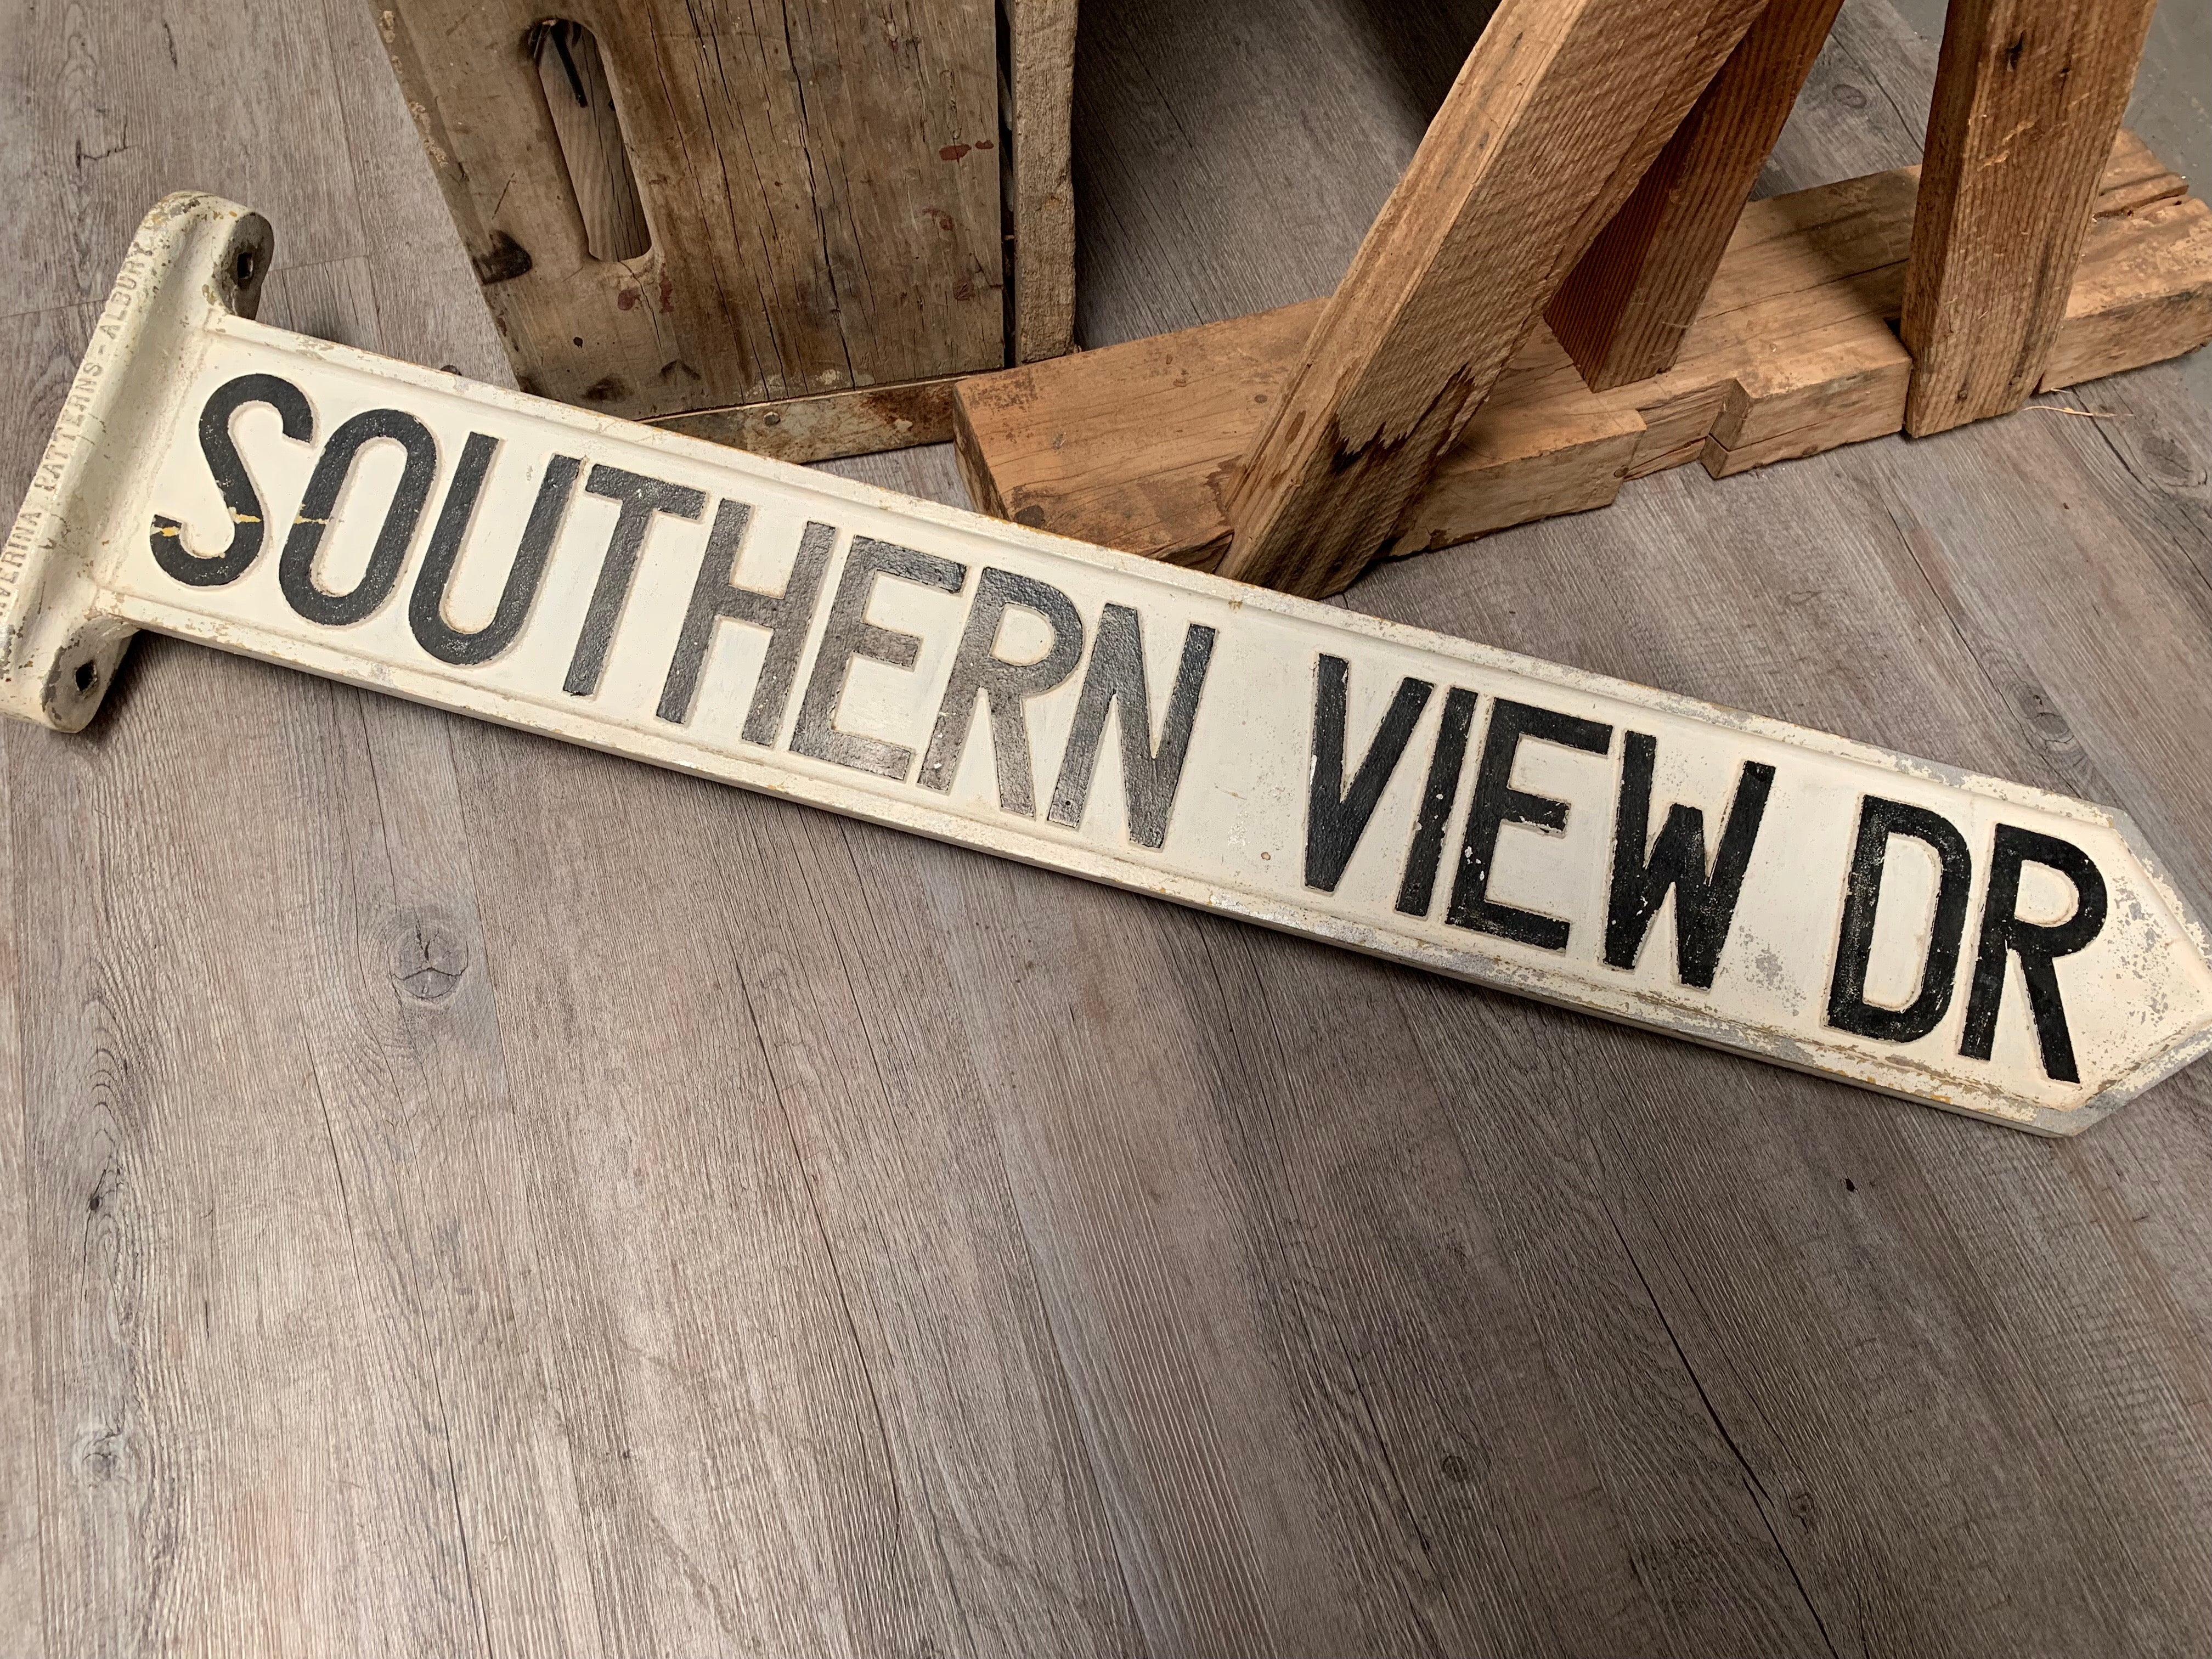 SOUTHERN VIEW DR Industrial Metal Sign